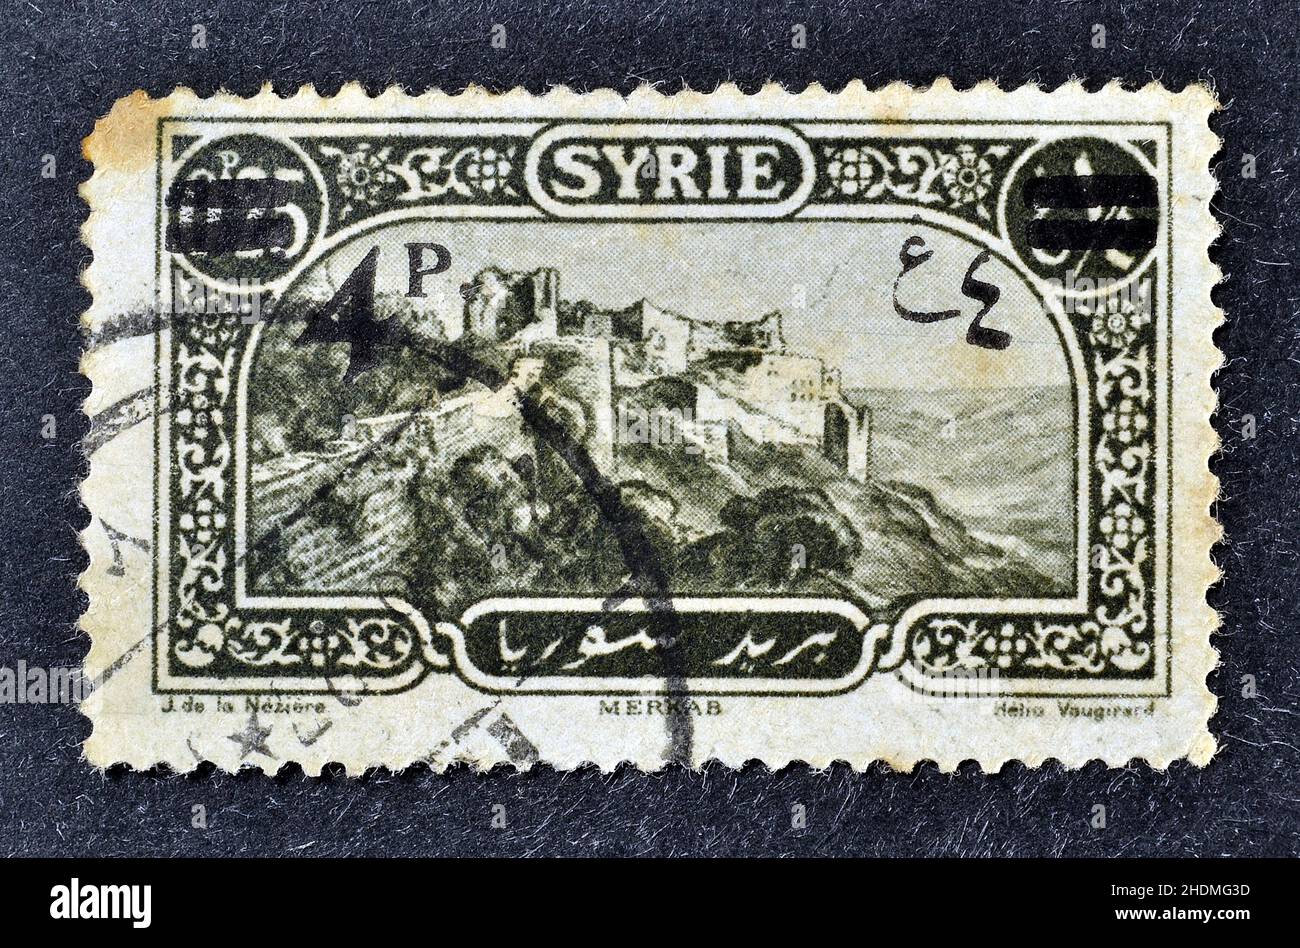 Cancelled postage stamp printed by Syria, that shows View of Merkaba, overprinted, circa 1925. Stock Photo